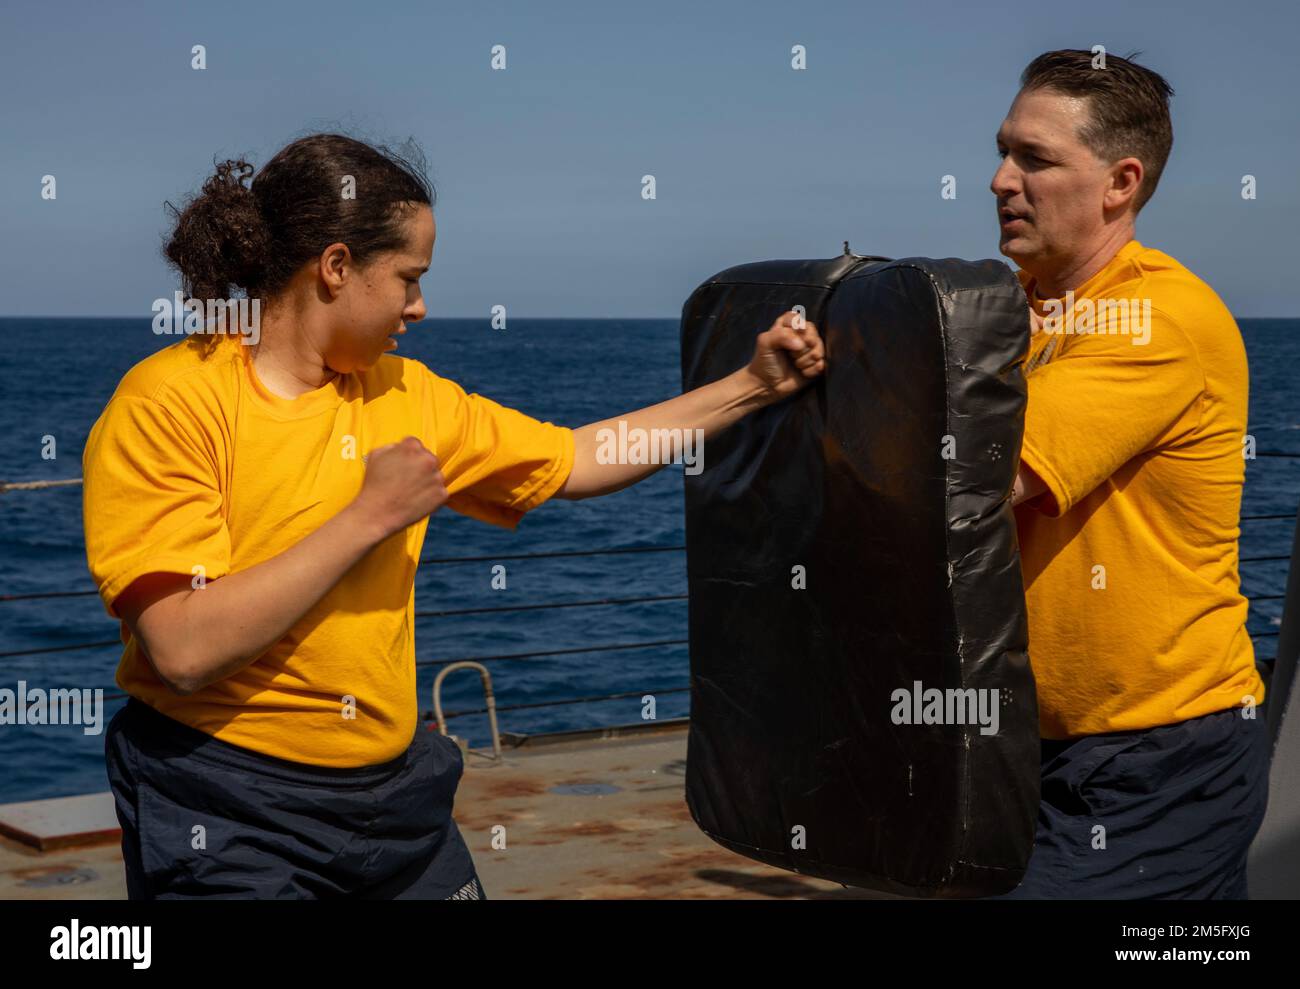 SOUTH CHINA SEA (March 15, 2022) Ensign Catherine Hawkes (left), from Hillsborough, New Jersey, and Lt. j.g. James Hutchison (right), from Huntsville, Alabama, participate in non-lethal weapons training aboard the Arleigh Burke-class guided-missile destroyer USS Ralph Johnson (DDG 114). Ralph Johnson is assigned to Task Force 71/Destroyer Squadron (DESRON) 15, the Navy’s largest forward-deployed DESRON and the U.S. 7th fleet’s principal surface force. Stock Photo